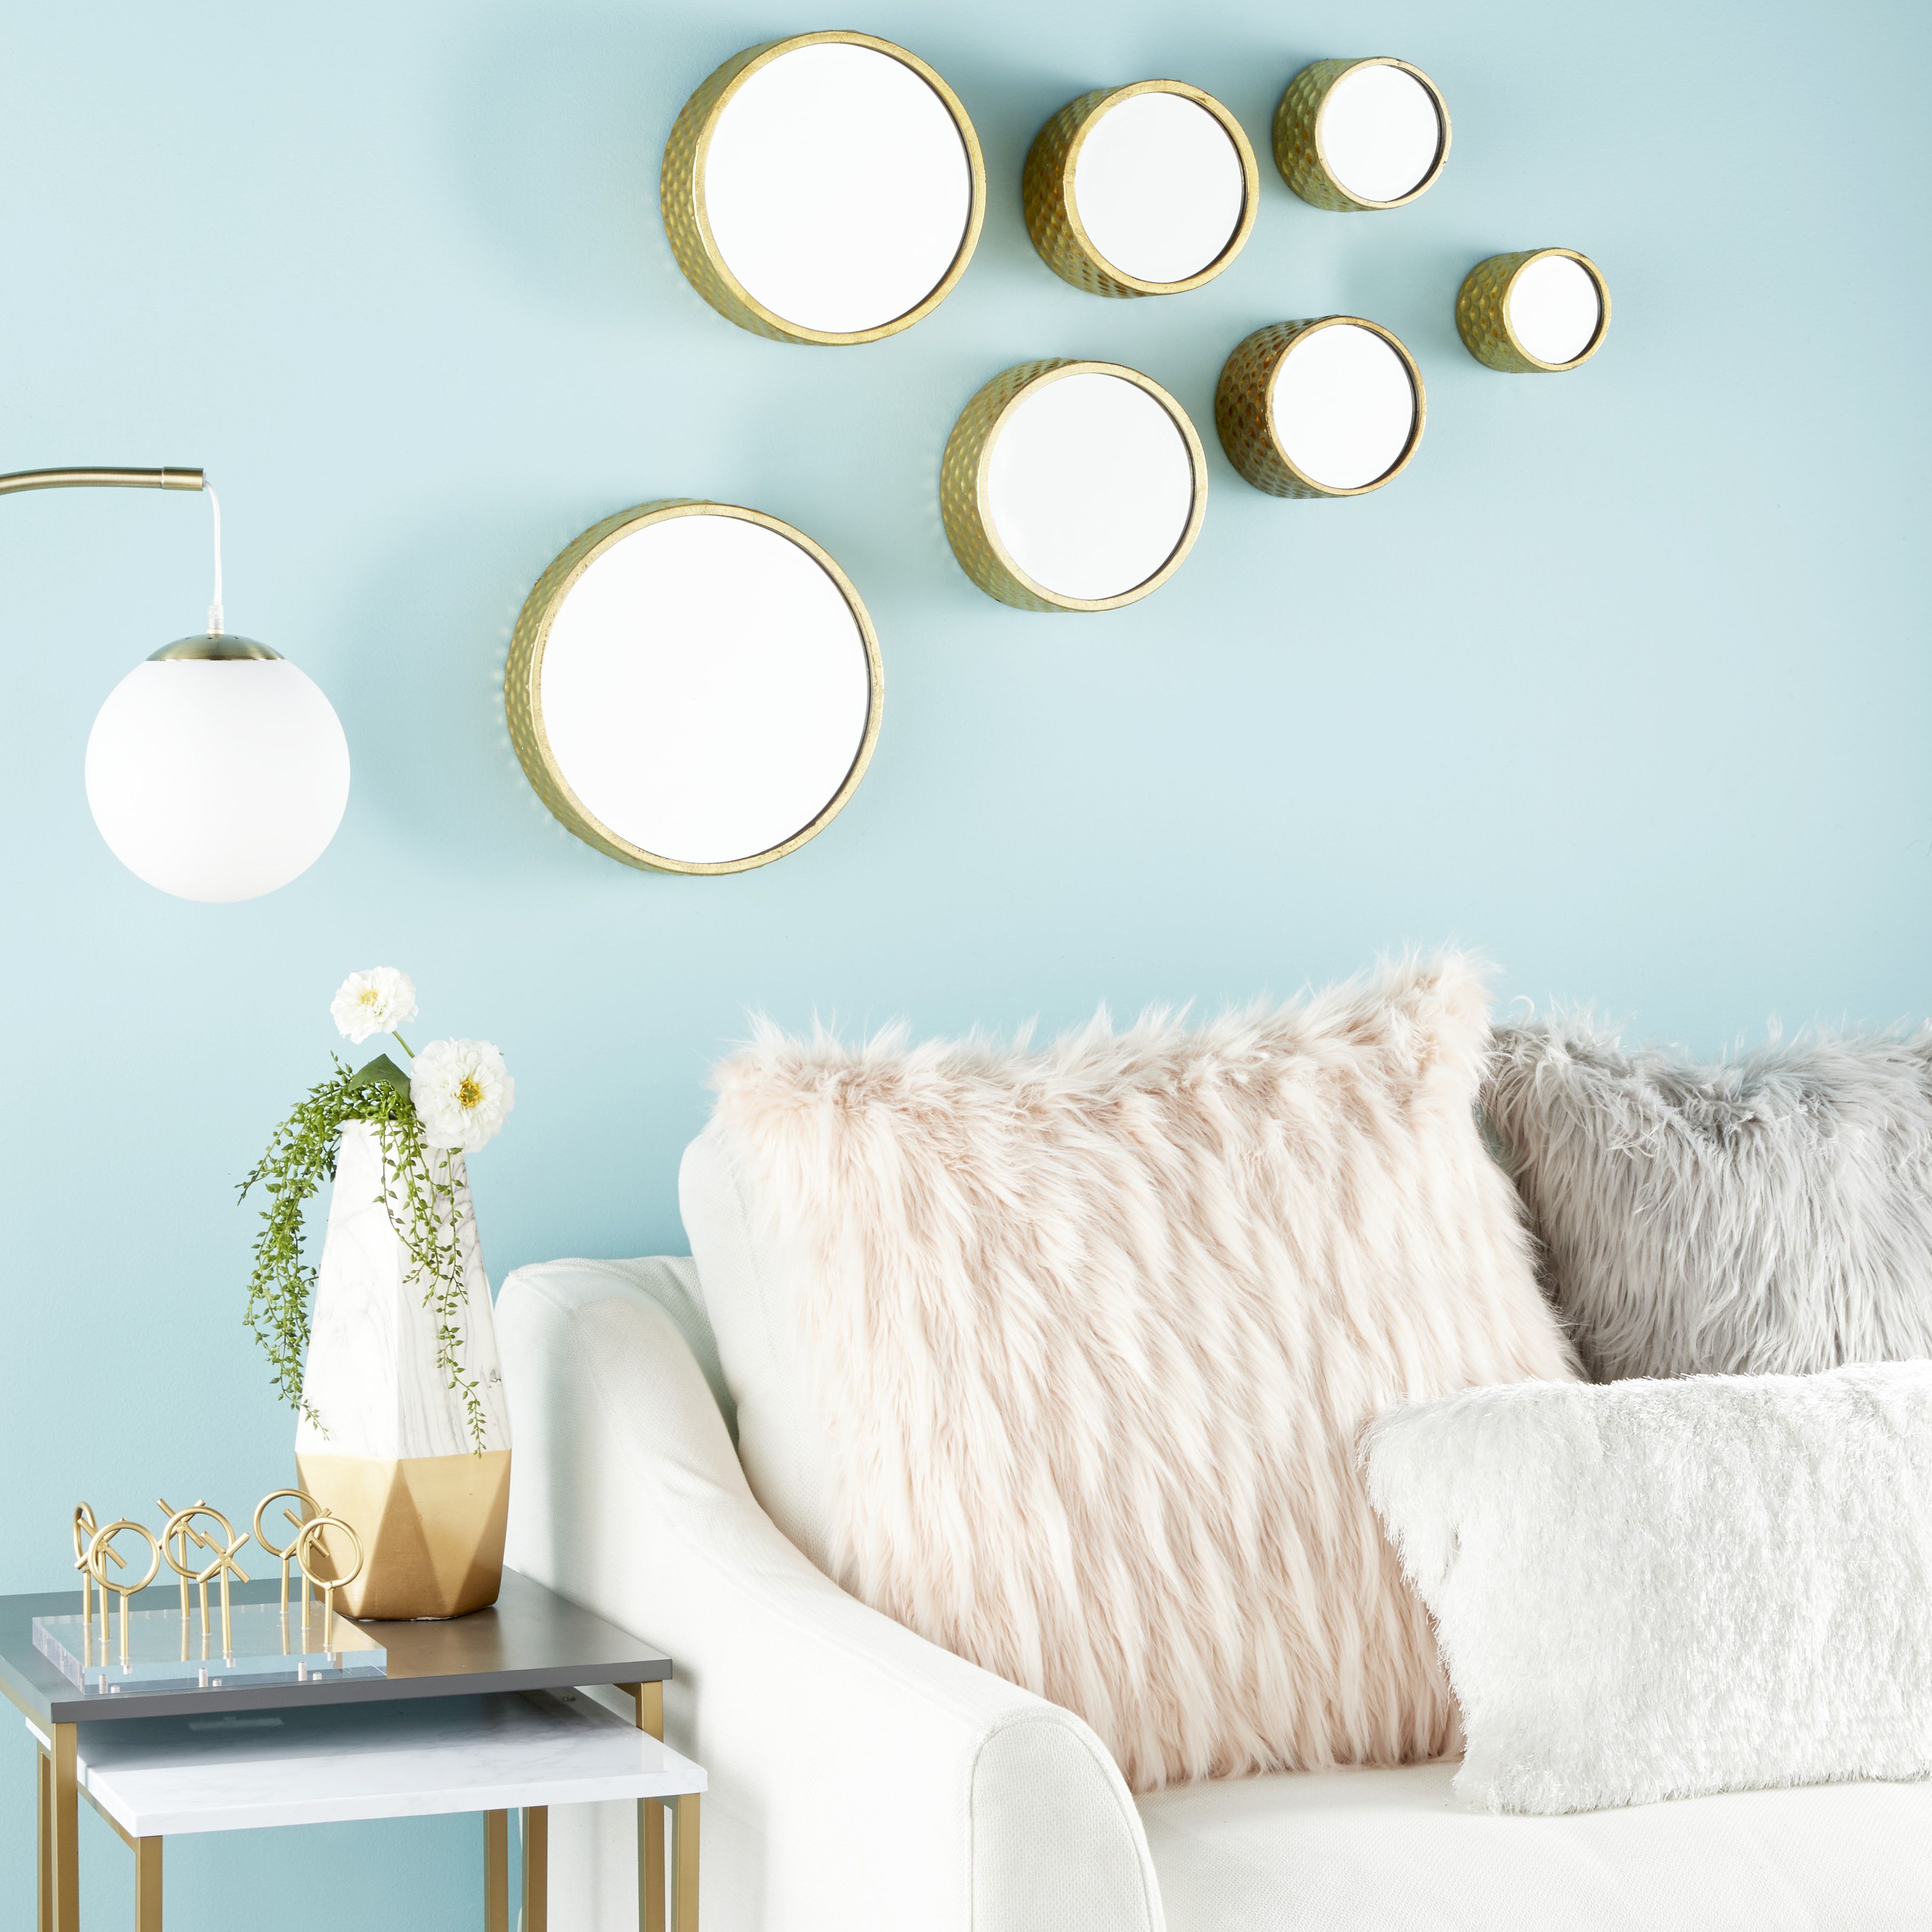 Cosmoliving Small, Round Metallic Gold Hammered Metal Decorative Wall  Mirrors (View 16 of 20)